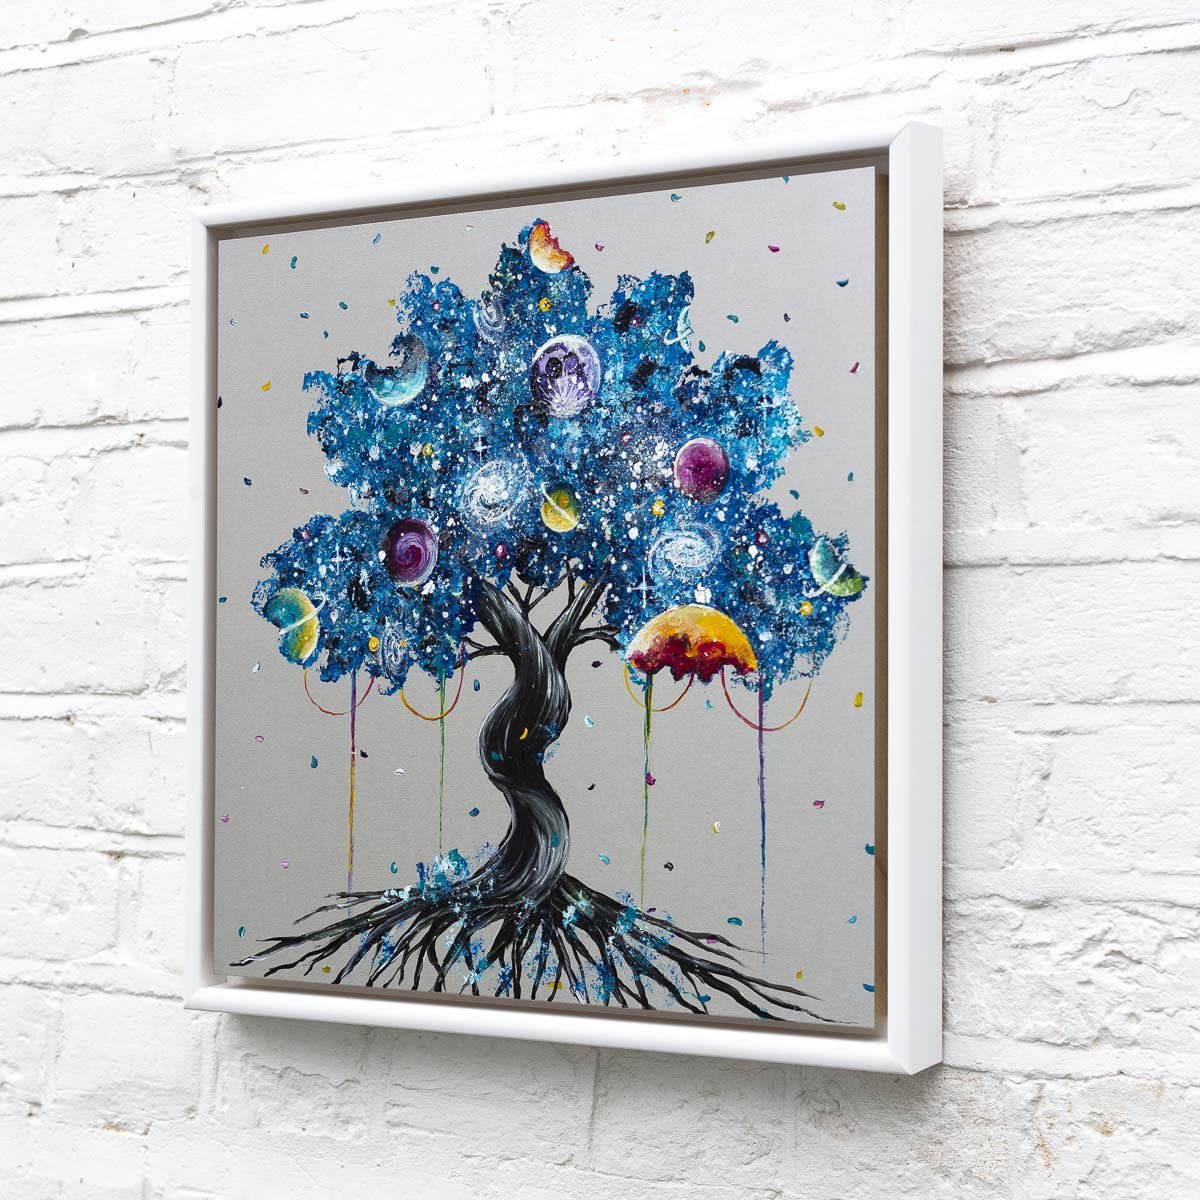 Our Colourful World - Original Becky Smith Framed